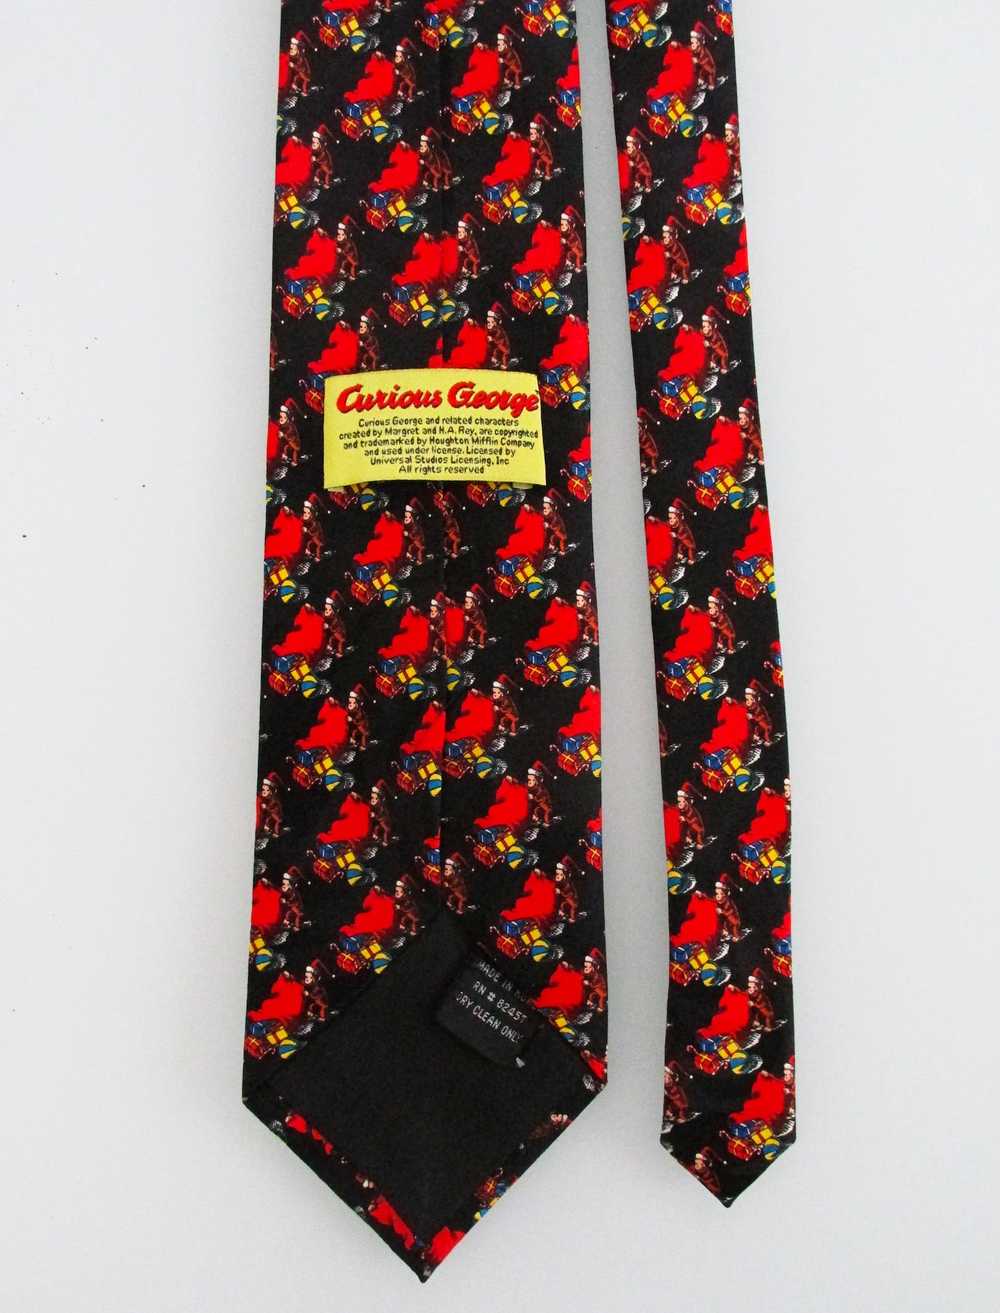 Other Curious George Christmas Men's Tie - image 3